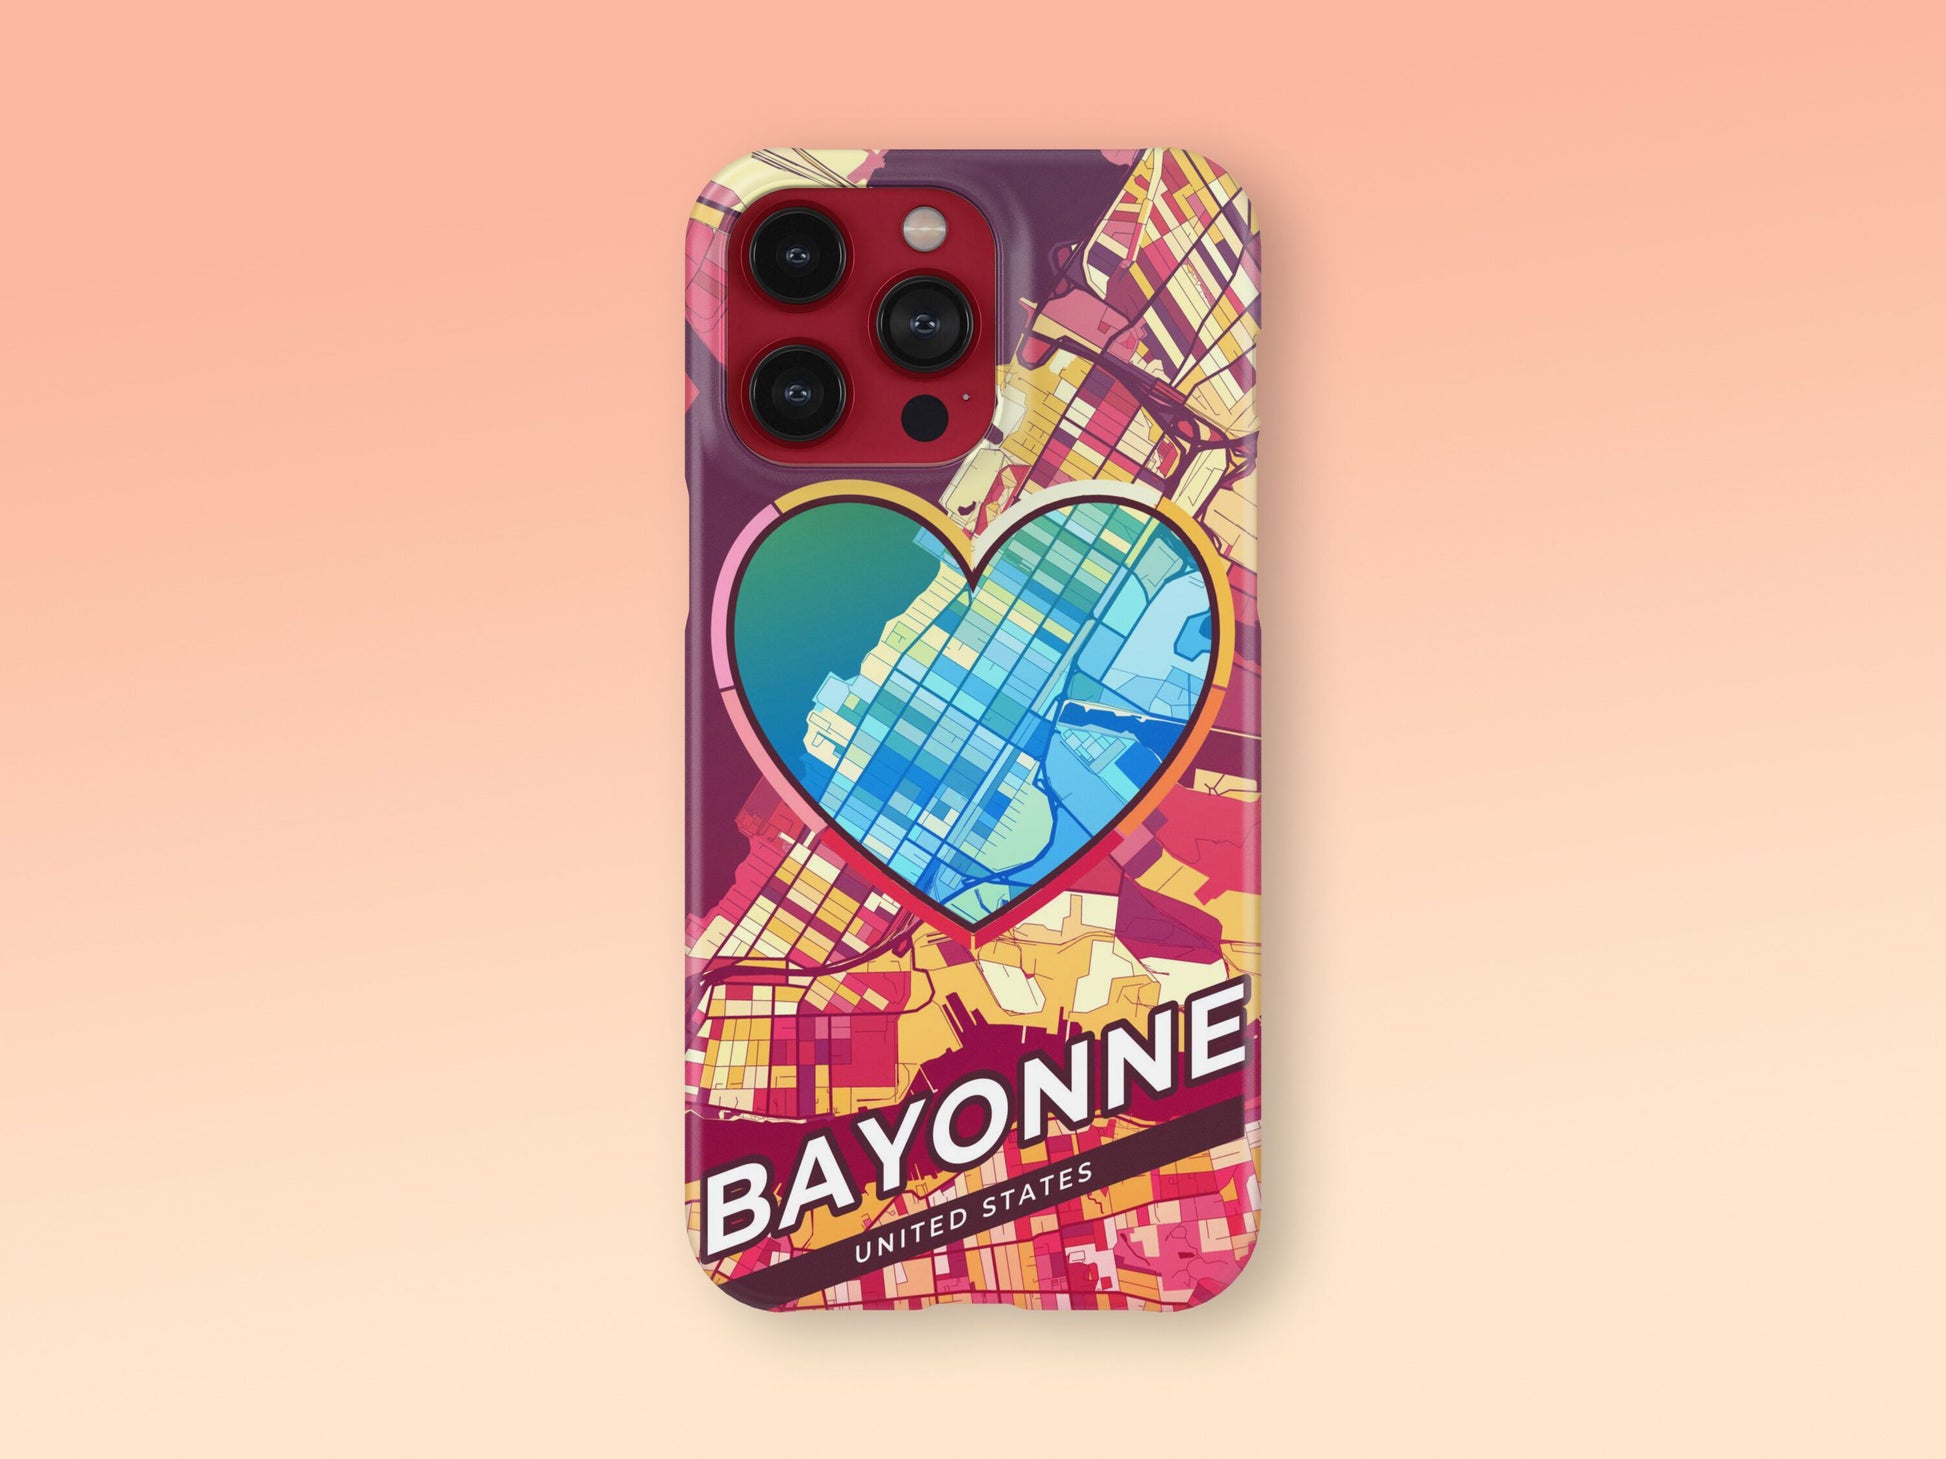 Bayonne New Jersey slim phone case with colorful icon. Birthday, wedding or housewarming gift. Couple match cases. 2